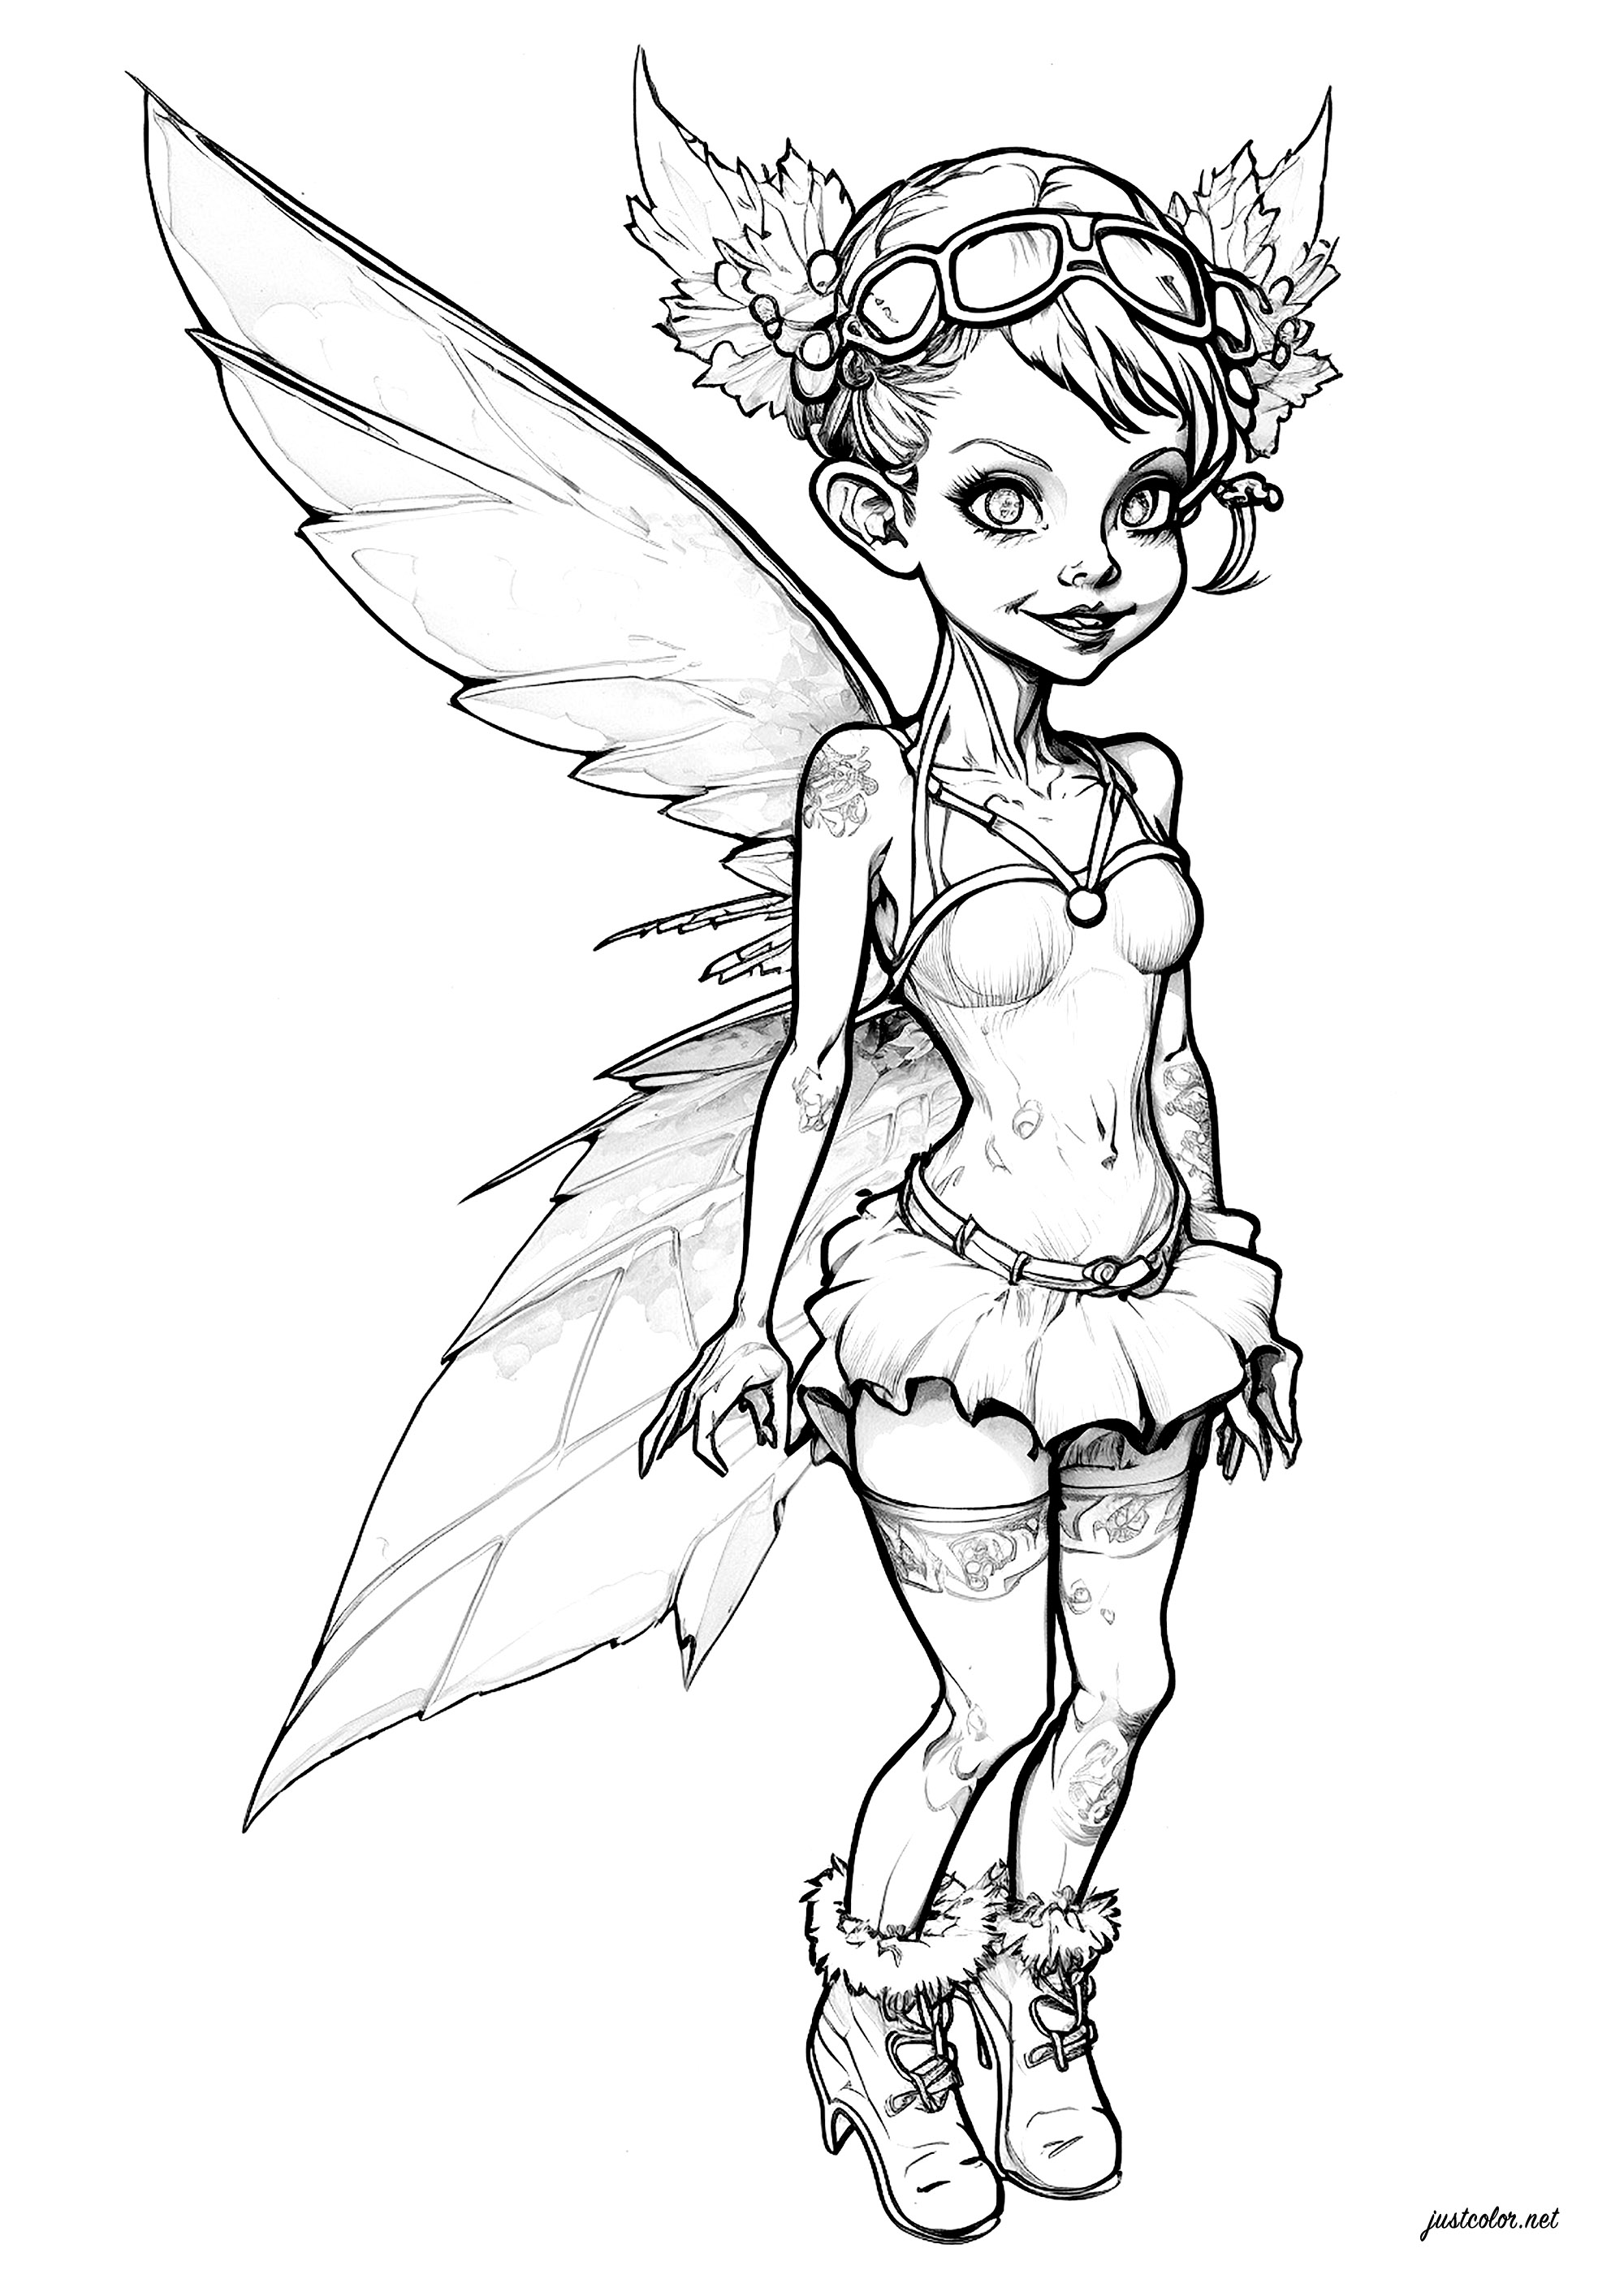 Fairy of the forest. A beautiful little fairy with her pretty outfit and her beautiful spread wings.